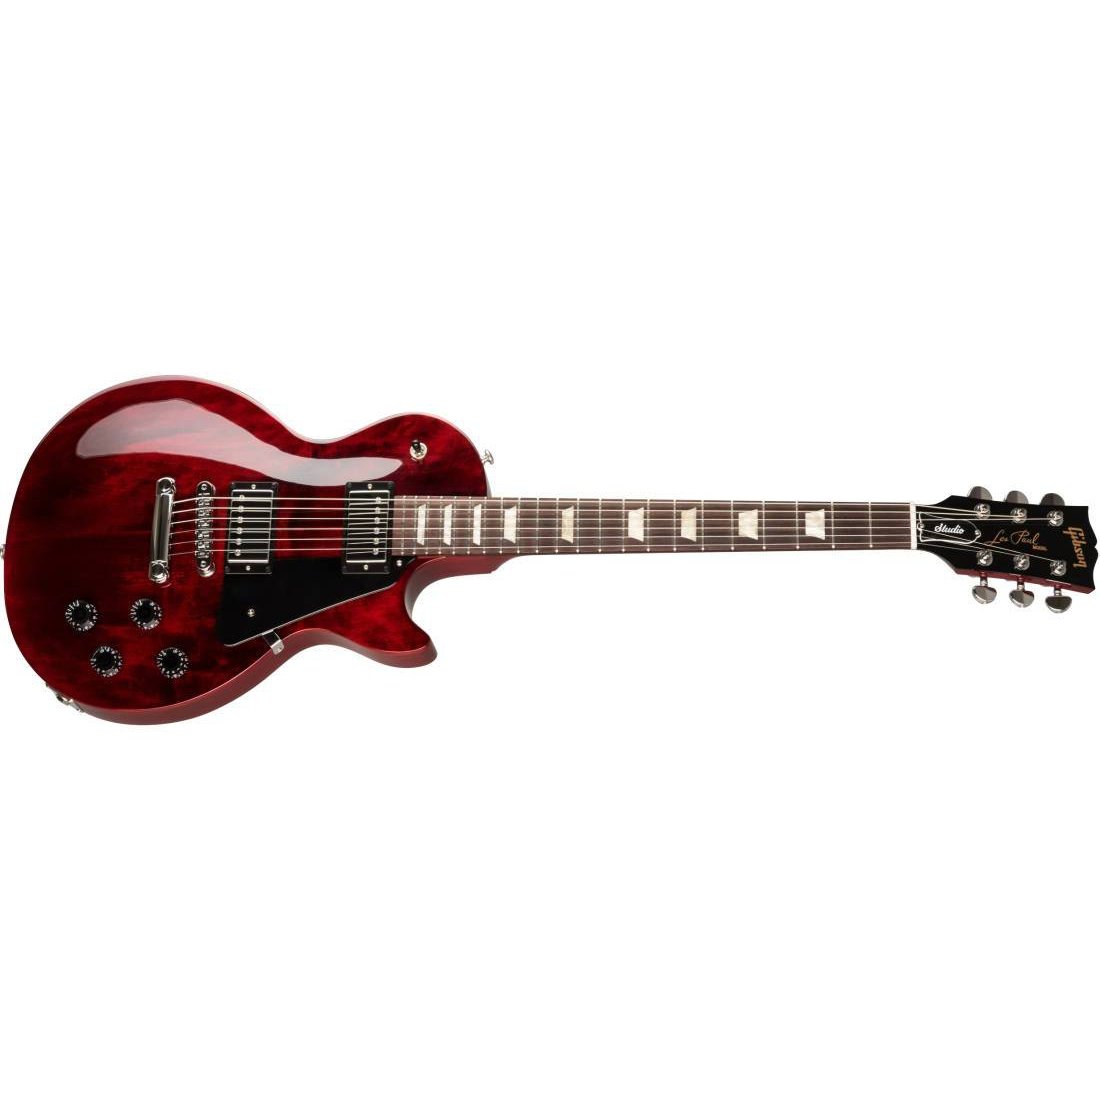 Gibson LPST00WRCH Les Paul Studio Electric Guitar with Gig Bag-Wine Red-Music World Academy